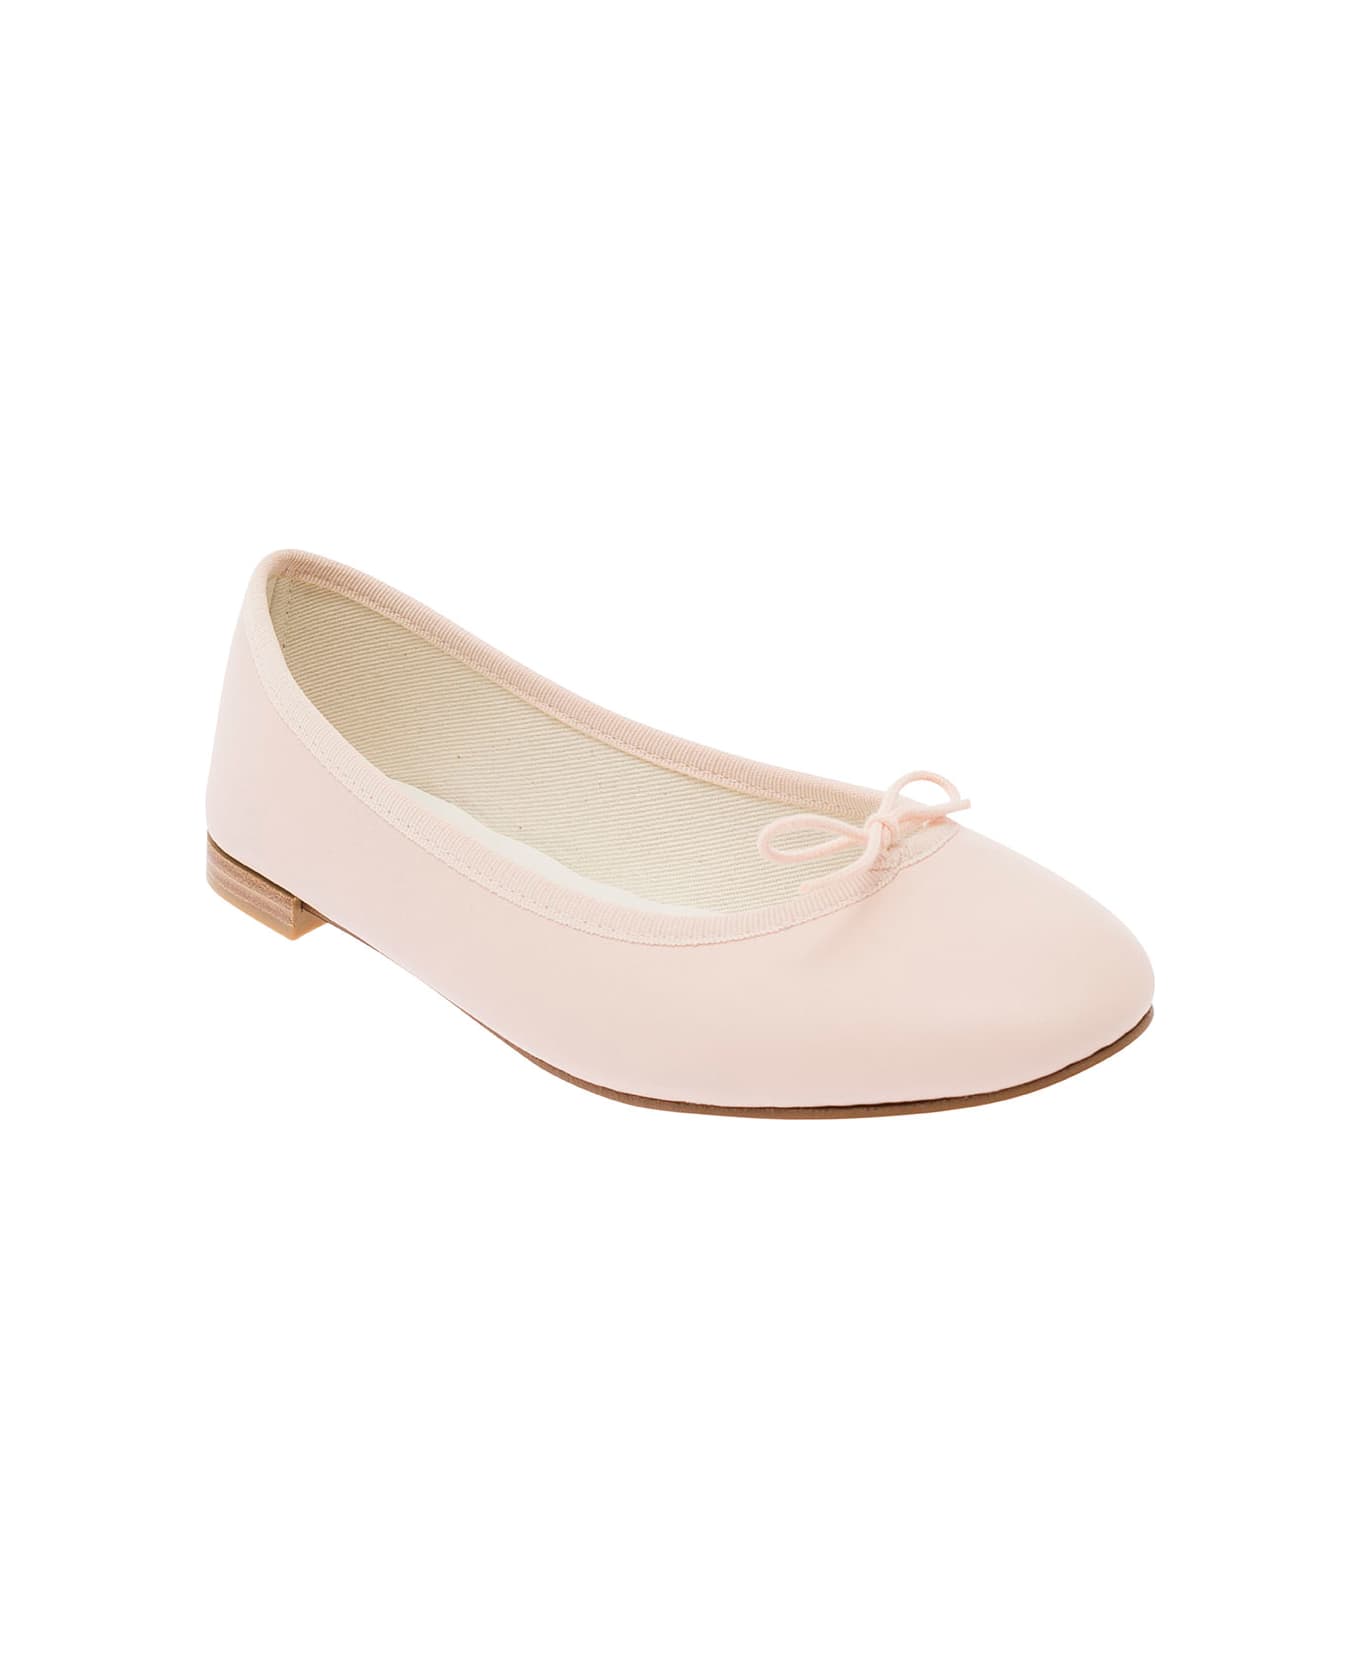 Repetto 'cendrillon' Pink Ballet Flats With Bow Detail In Smooth Leather Woman - Pink フラットシューズ